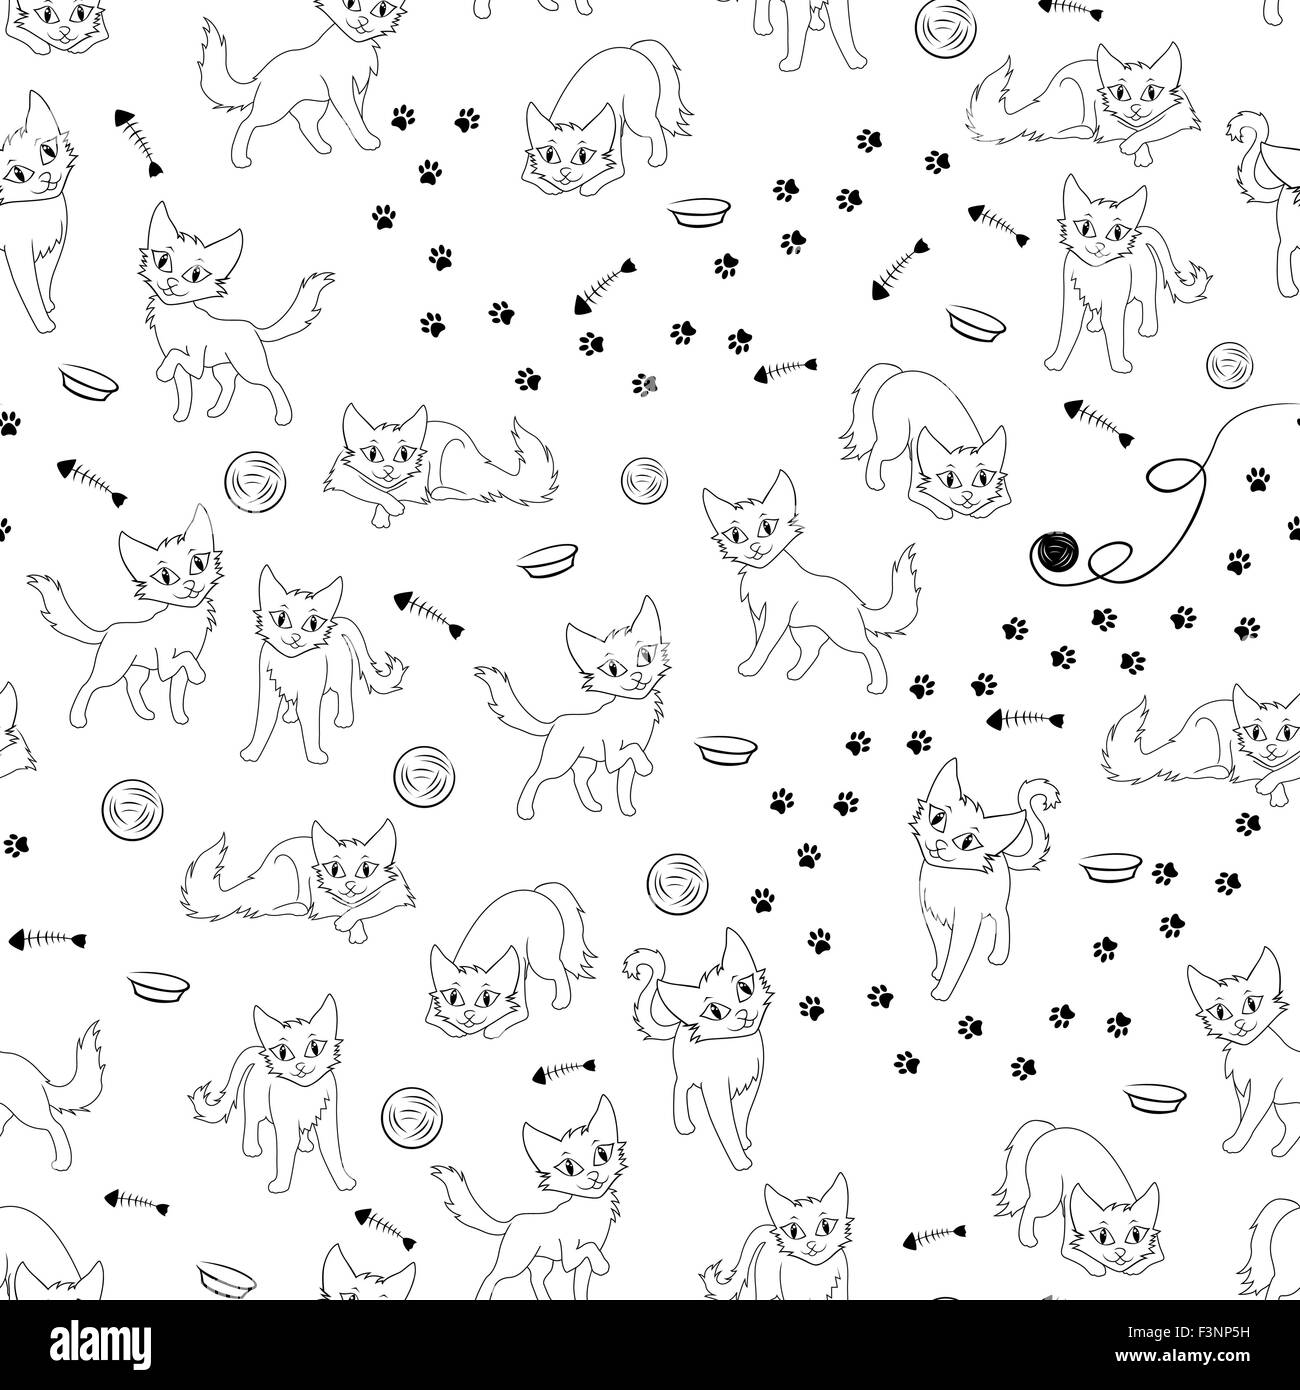 Funny cartoon cats and their accessories, seamless black and white vector pattern Stock Vector